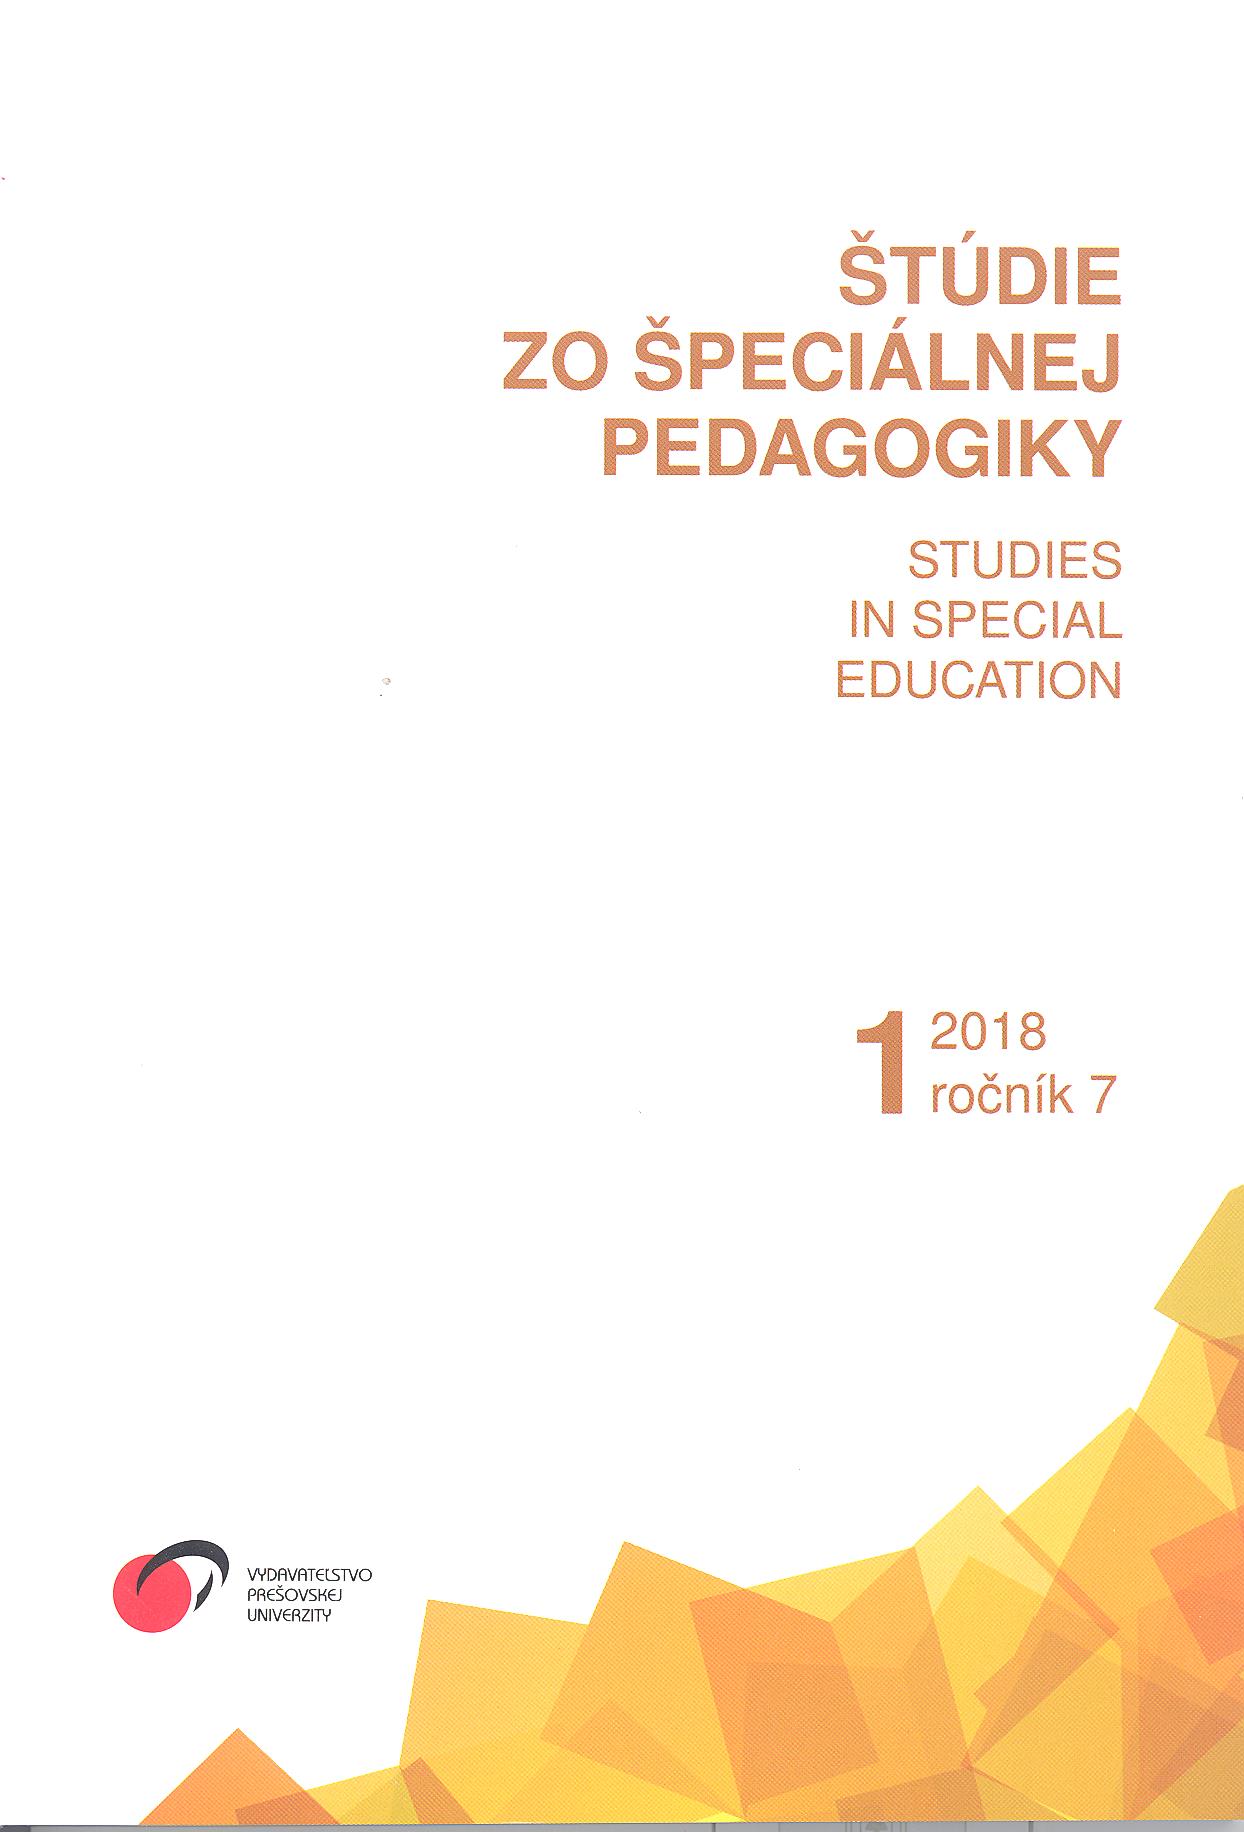 Personal and Professional Portrait of František Kábele
in the Context of Special Education Cover Image